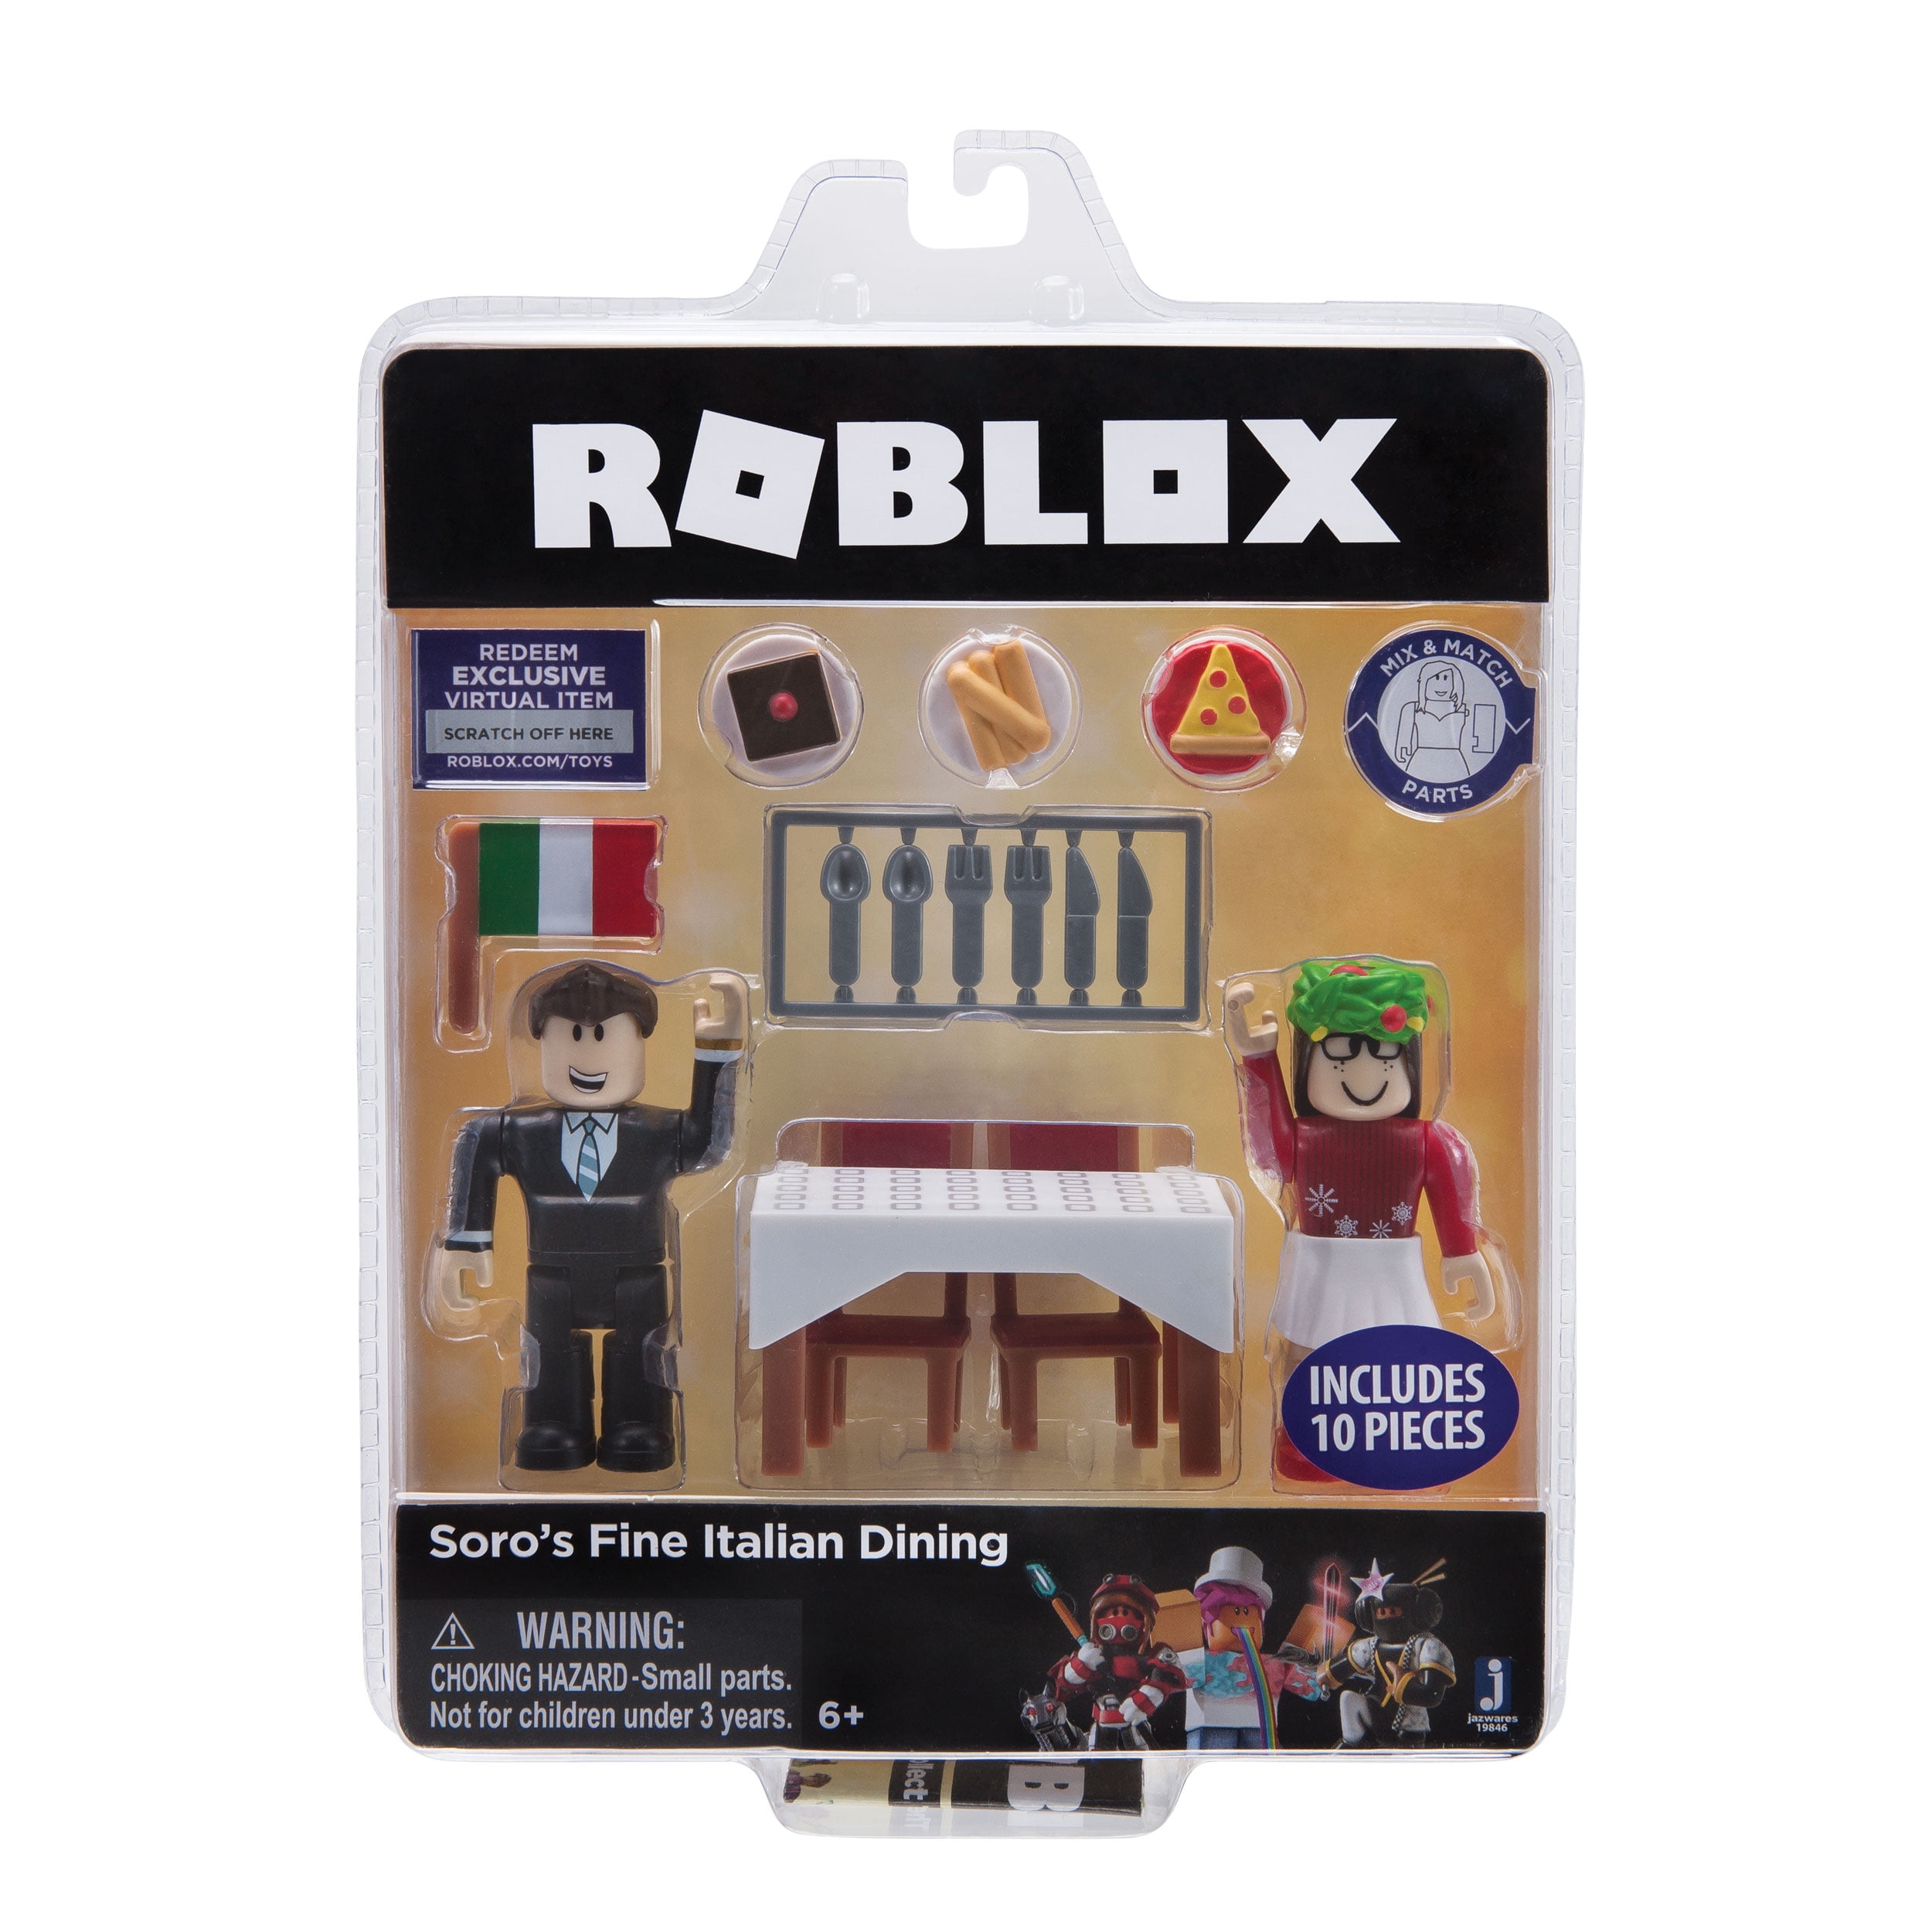 Roblox Celebrity Collection Soro S Fine Italian Dining Game Pack Includes Exclusive Virtual Item Walmart Com Walmart Com - indoor pond roblox